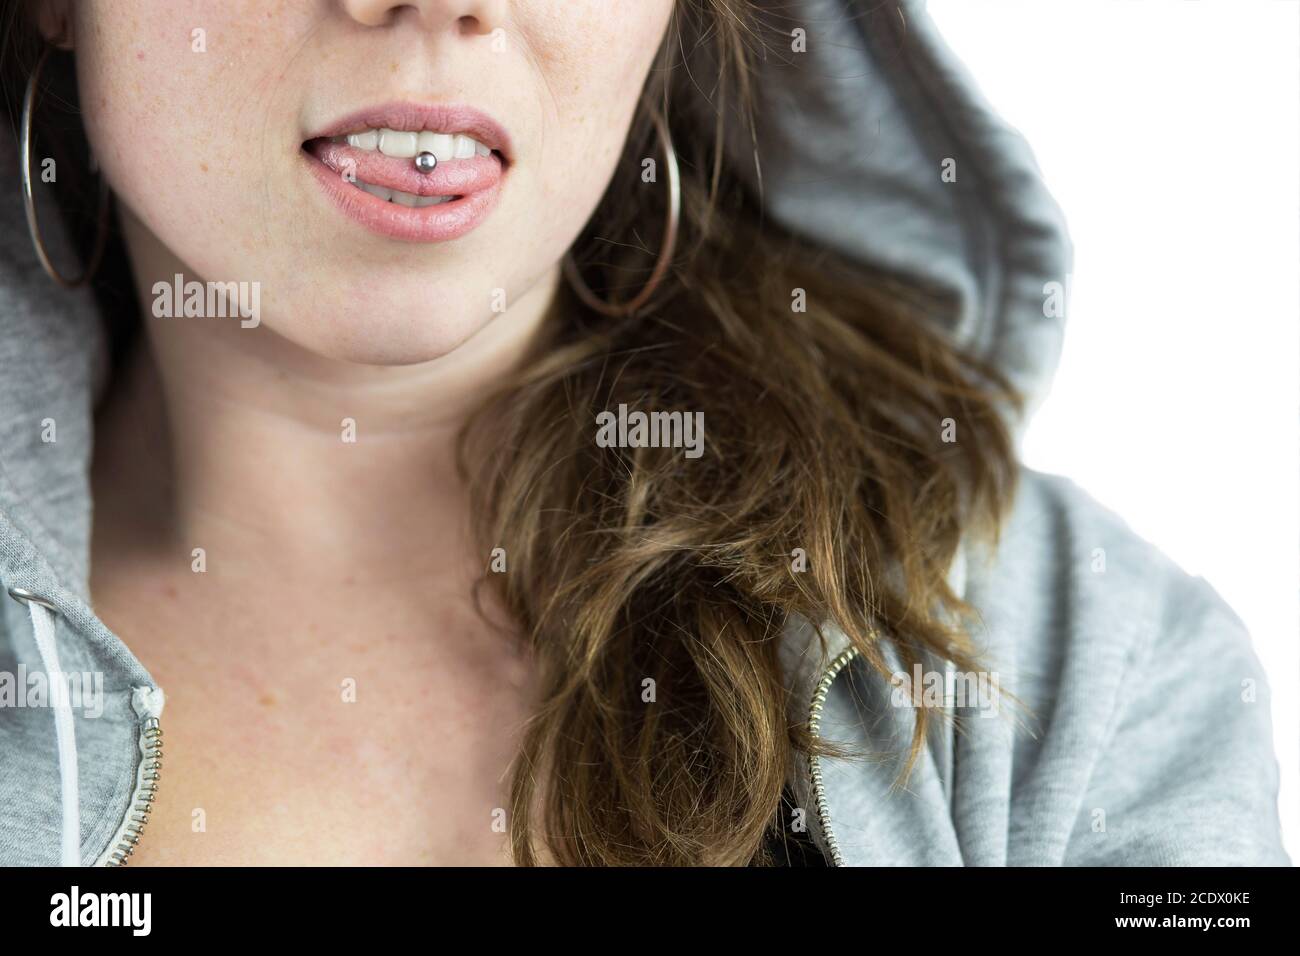 Young teen girl with tongue piercing and hoodie Stock Photo